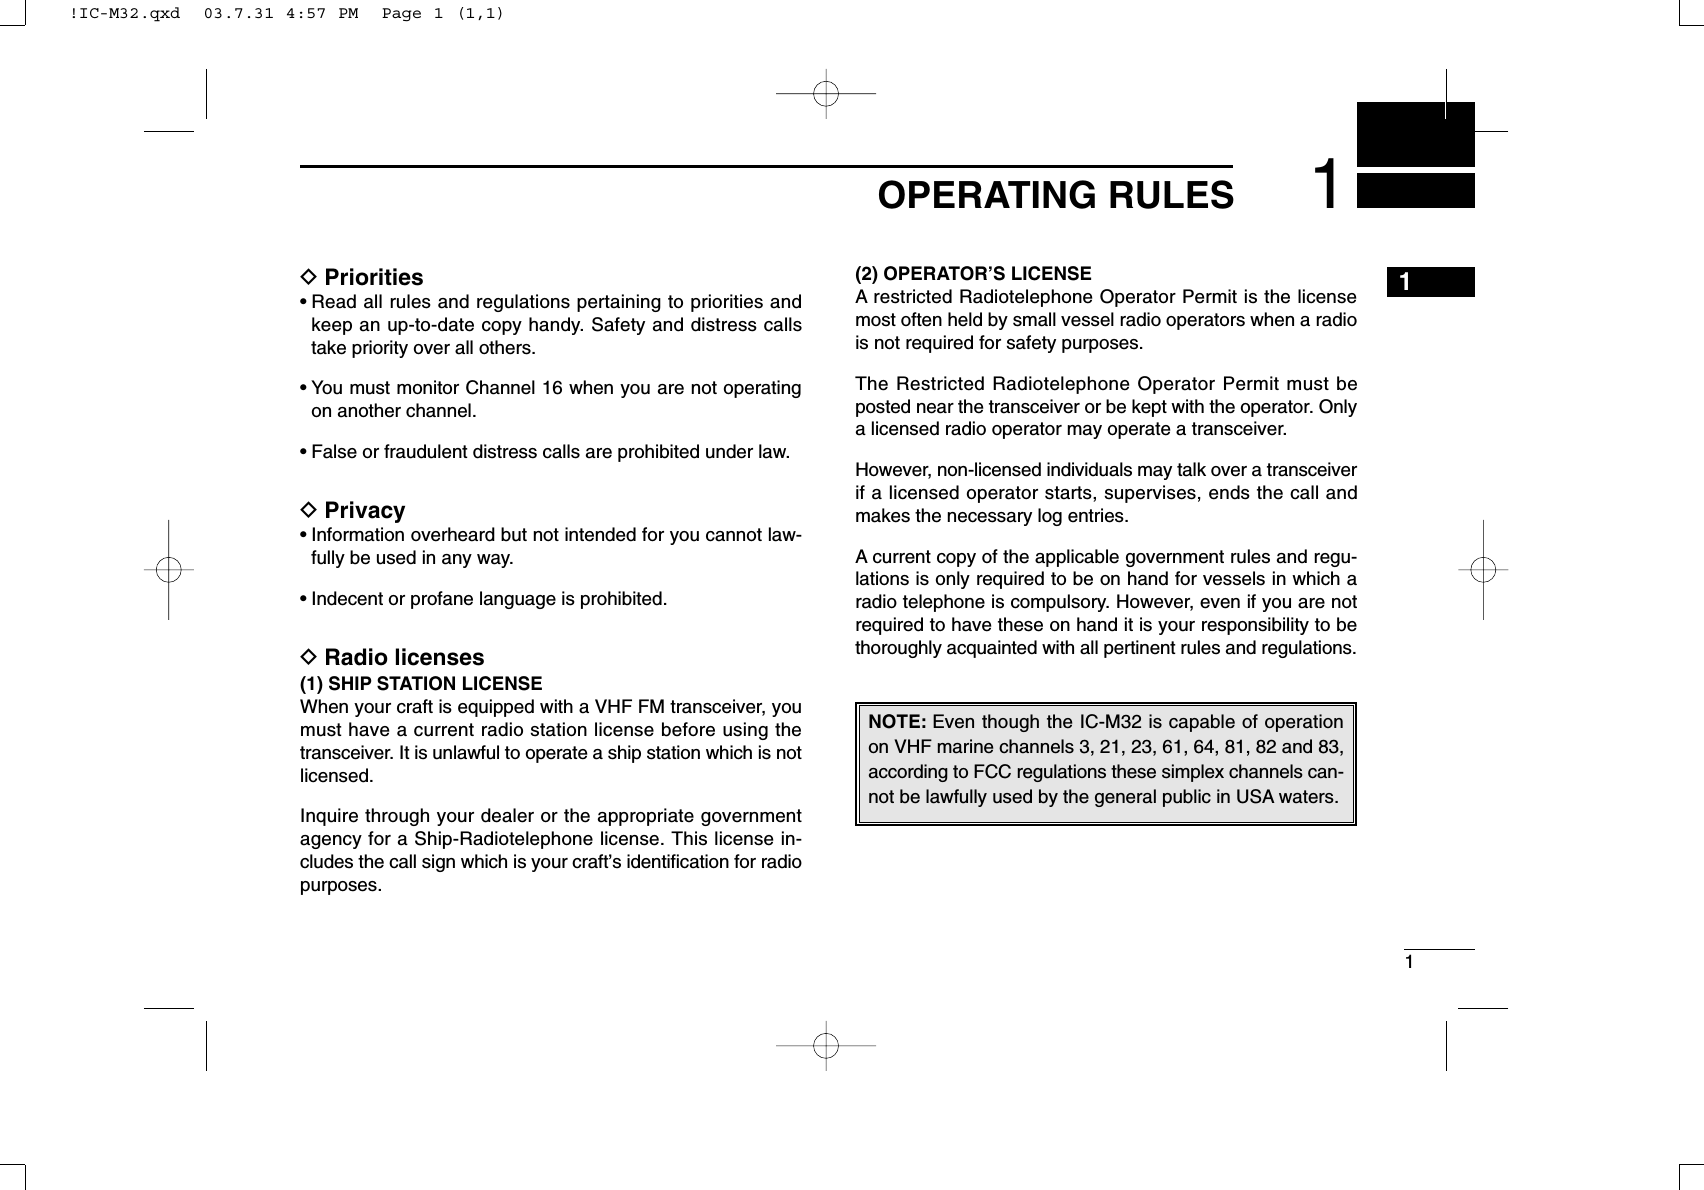 11OPERATING RULES1DPriorities• Read all rules and regulations pertaining to priorities andkeep an up-to-date copy handy. Safety and distress callstake priority over all others.• You must monitor Channel 16 when you are not operatingon another channel.• False or fraudulent distress calls are prohibited under law.DPrivacy• Information overheard but not intended for you cannot law-fully be used in any way.• Indecent or profane language is prohibited.DRadio licenses(1) SHIP STATION LICENSEWhen your craft is equipped with a VHF FM transceiver, youmust have a current radio station license before using thetransceiver. It is unlawful to operate a ship station which is notlicensed.Inquire through your dealer or the appropriate governmentagency for a Ship-Radiotelephone license. This license in-cludes the call sign which is your craft’s identiﬁcation for radiopurposes.(2) OPERATOR’S LICENSEA restricted Radiotelephone Operator Permit is the licensemost often held by small vessel radio operators when a radiois not required for safety purposes.The Restricted Radiotelephone Operator Permit must beposted near the transceiver or be kept with the operator. Onlya licensed radio operator may operate a transceiver.However, non-licensed individuals may talk over a transceiverif a licensed operator starts, supervises, ends the call andmakes the necessary log entries.A current copy of the applicable government rules and regu-lations is only required to be on hand for vessels in which aradio telephone is compulsory. However, even if you are notrequired to have these on hand it is your responsibility to bethoroughly acquainted with all pertinent rules and regulations.NOTE: Even though the IC-M32 is capable of operationon VHF marine channels 3, 21, 23, 61, 64, 81, 82 and 83,according to FCC regulations these simplex channels can-not be lawfully used by the general public in USA waters.!IC-M32.qxd  03.7.31 4:57 PM  Page 1 (1,1)